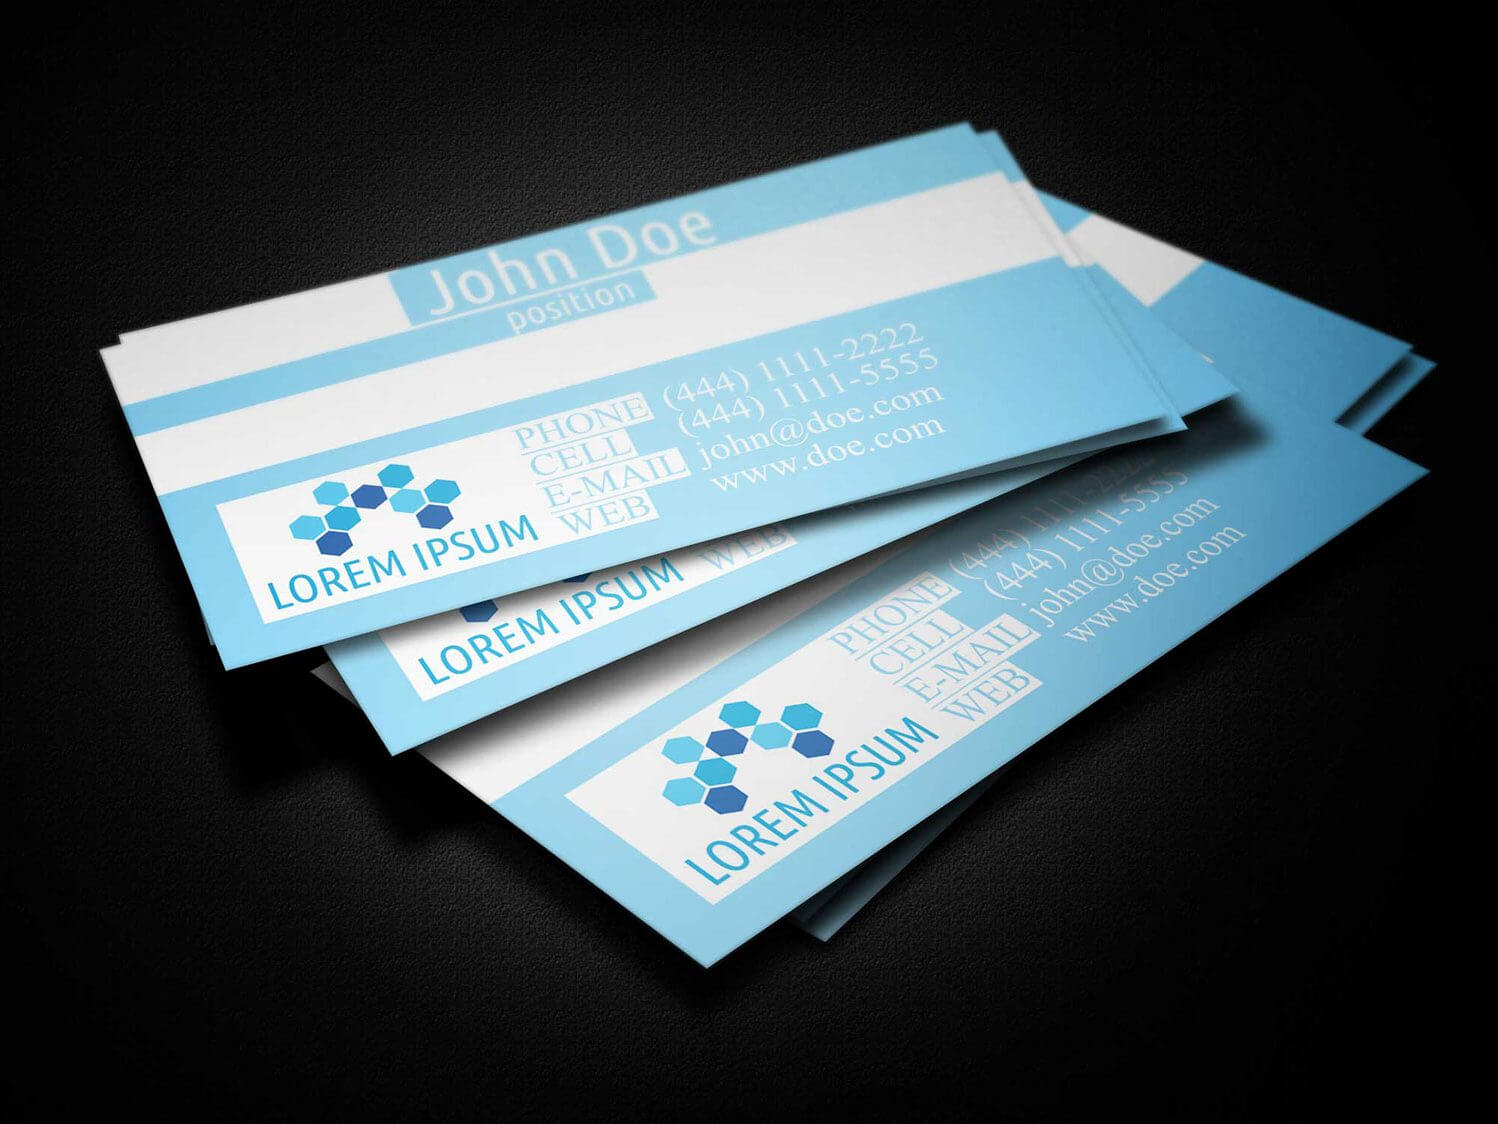 Blue Medical Business Card Template - Business Cards Lab Pertaining To Medical Business Cards Templates Free